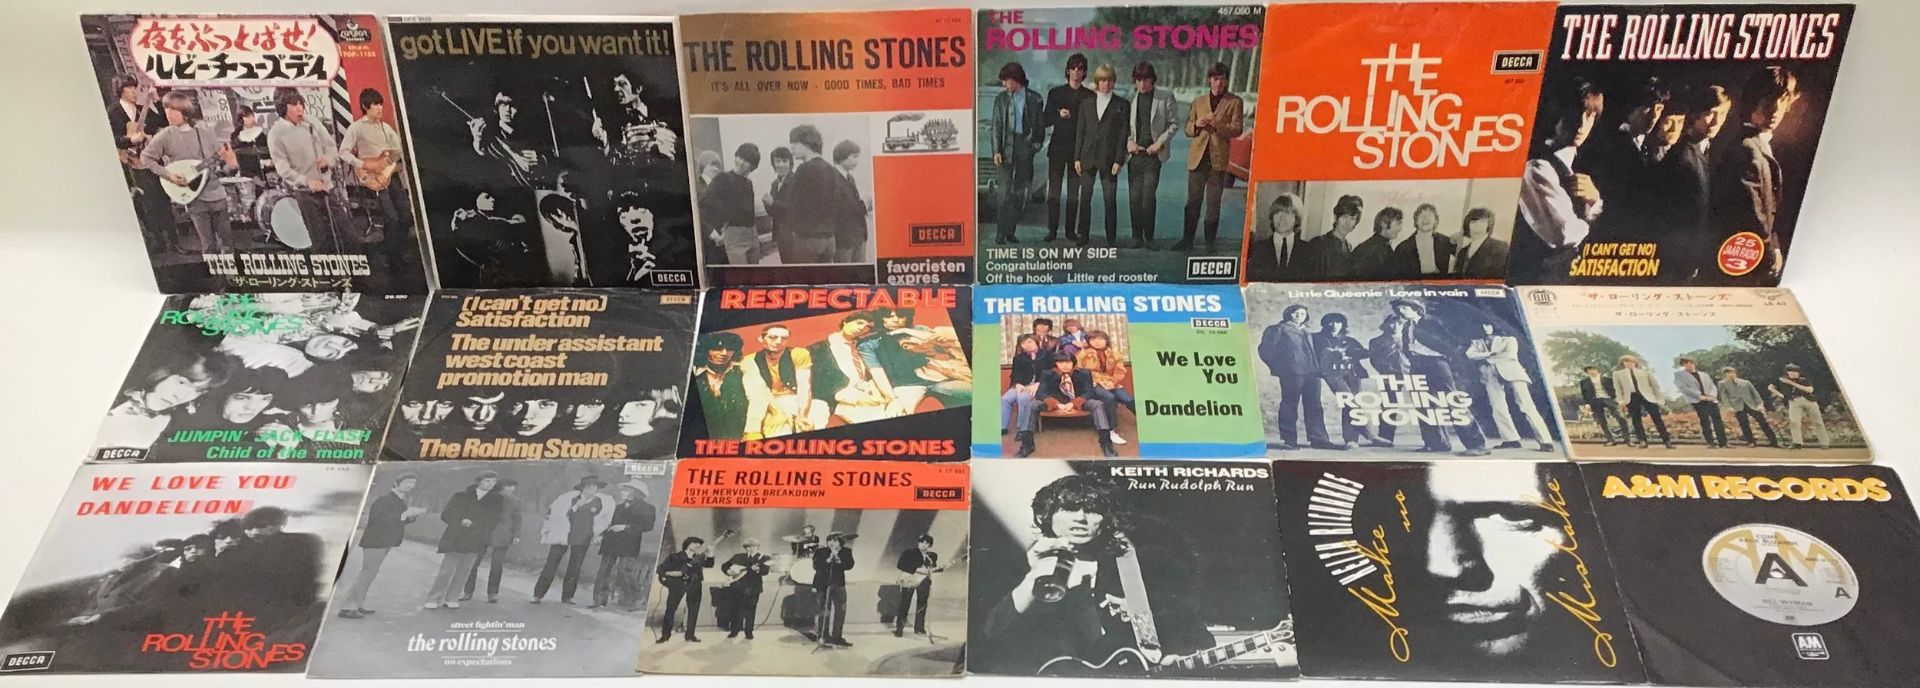 ROLLING STONES RELATED 7" SINGLE RECORDS. A total of 18 makes this lot up with foreign and UK